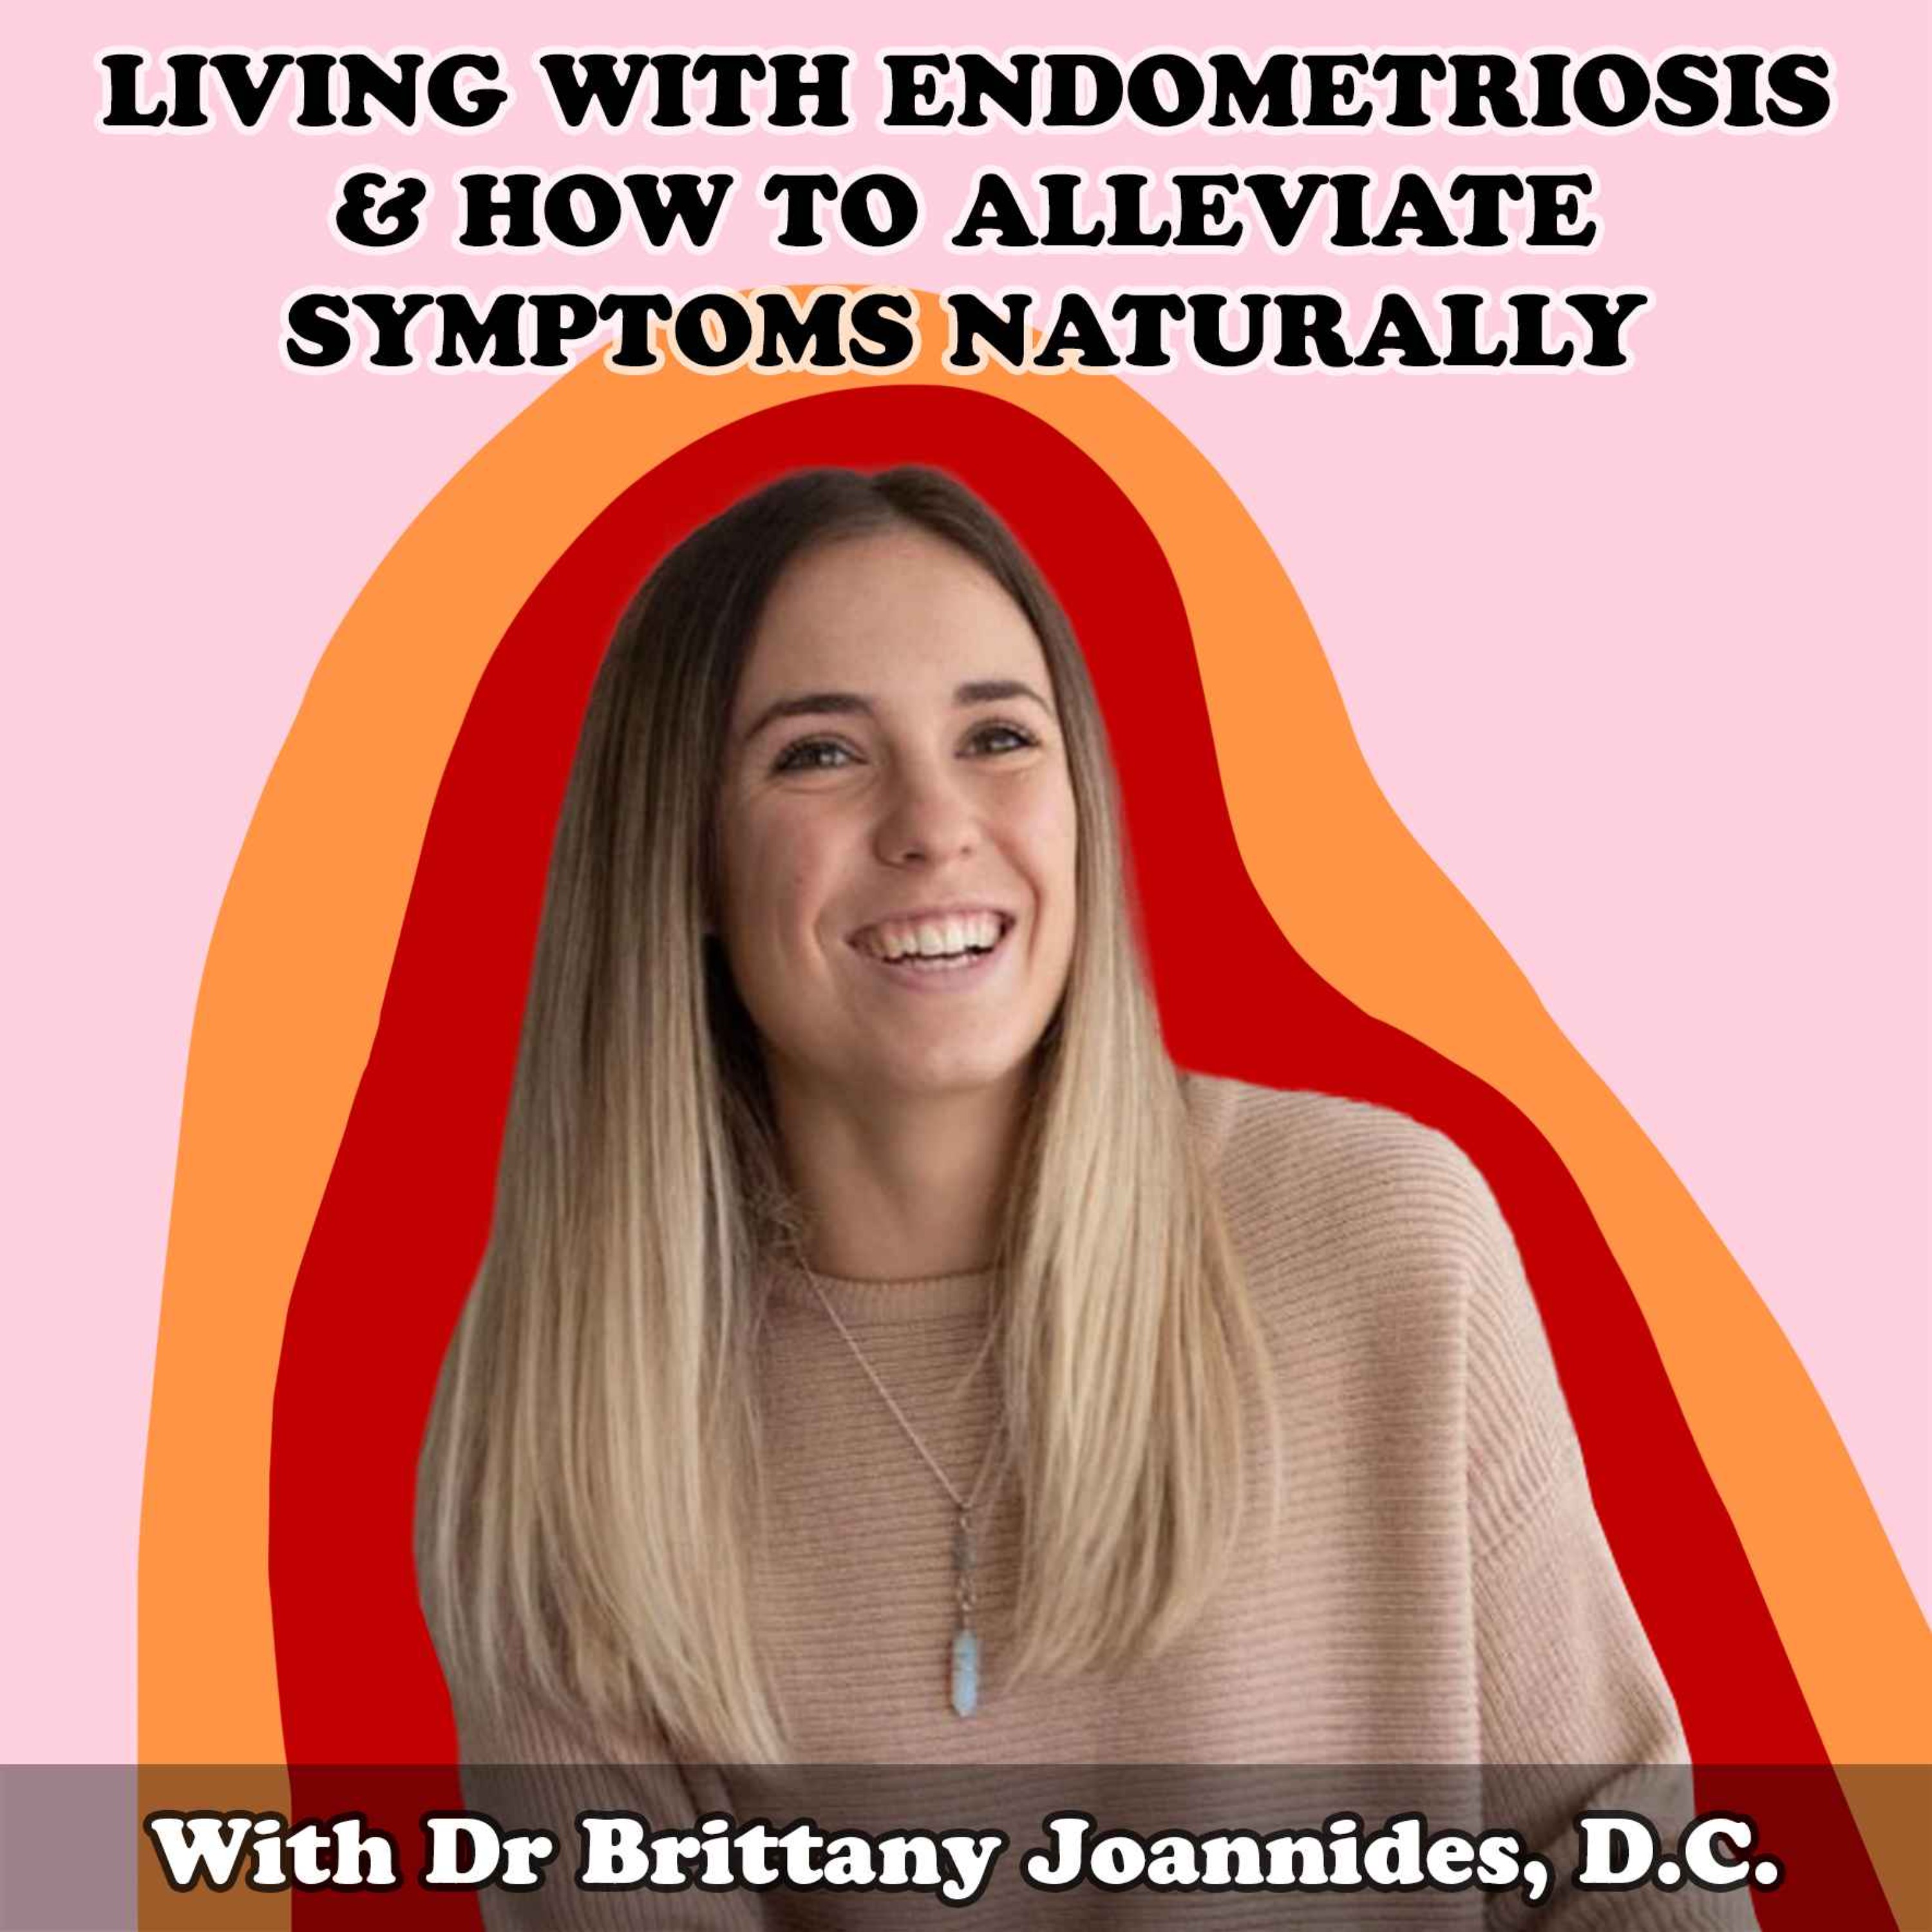 #25 Living With Endometriosis & How To Alleviate Symptoms Naturally With Dr Brittany Joannides, D.C.